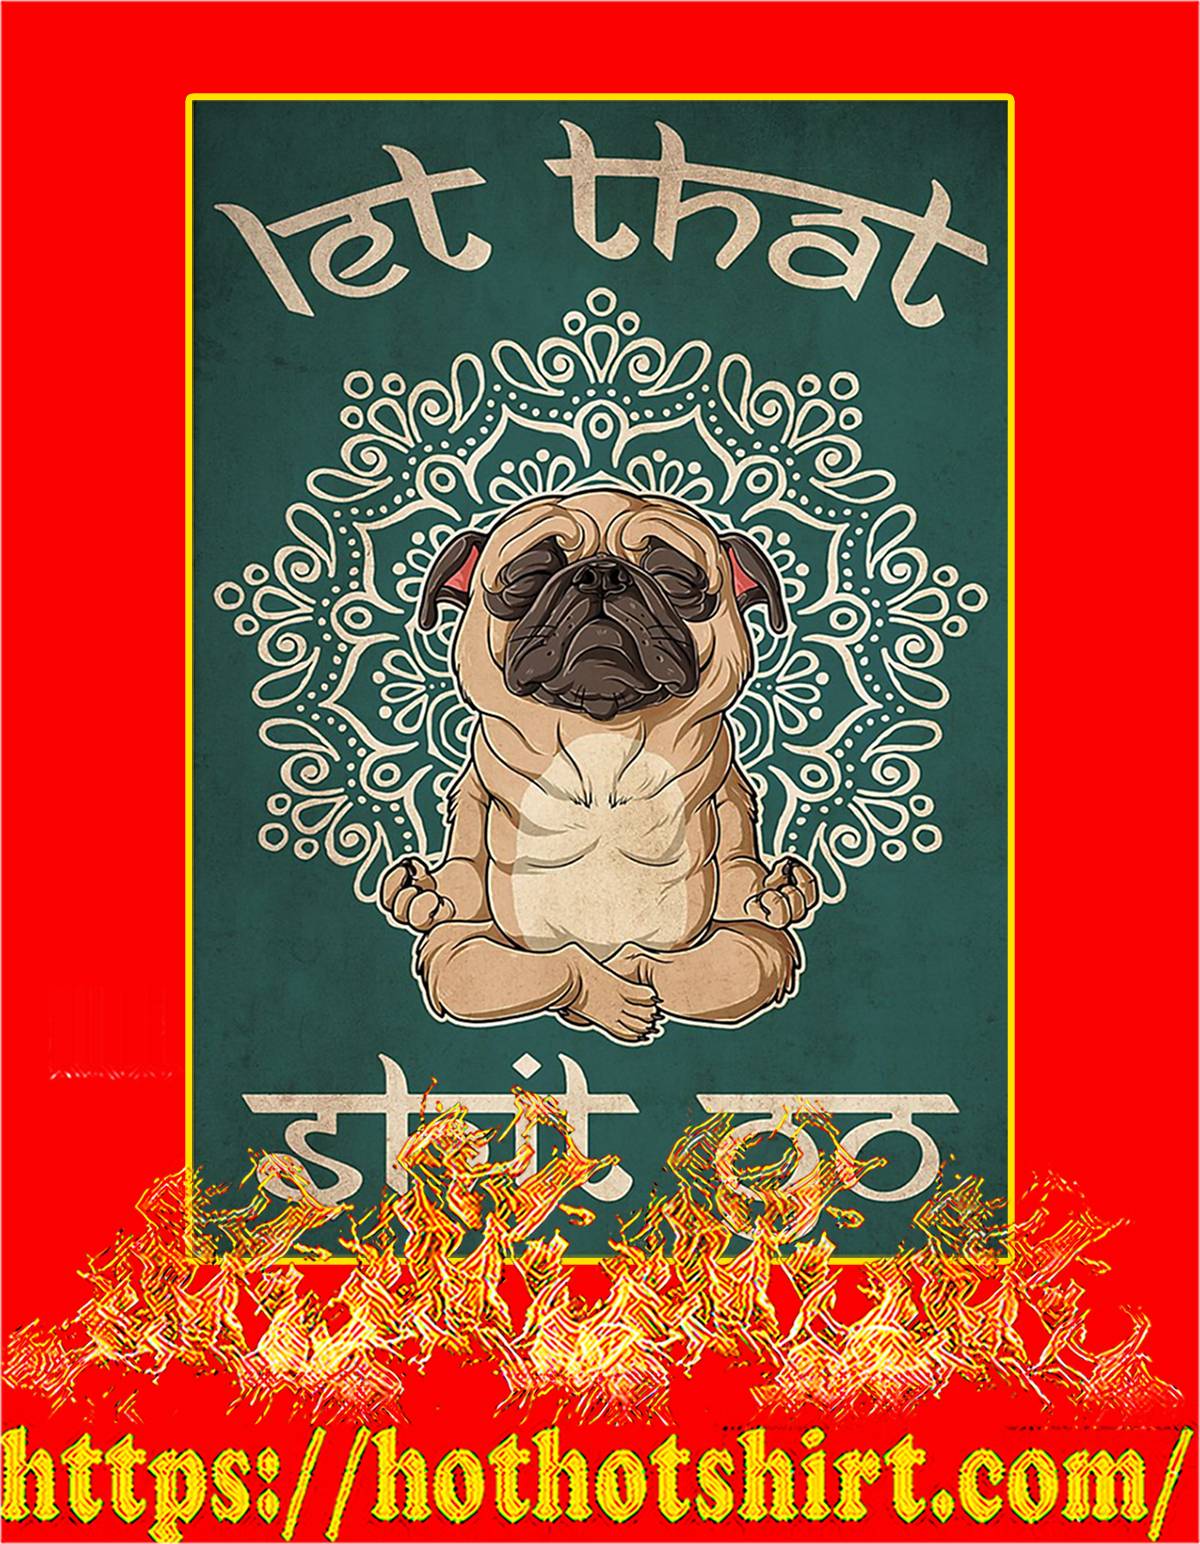 Pug let that shit go poster